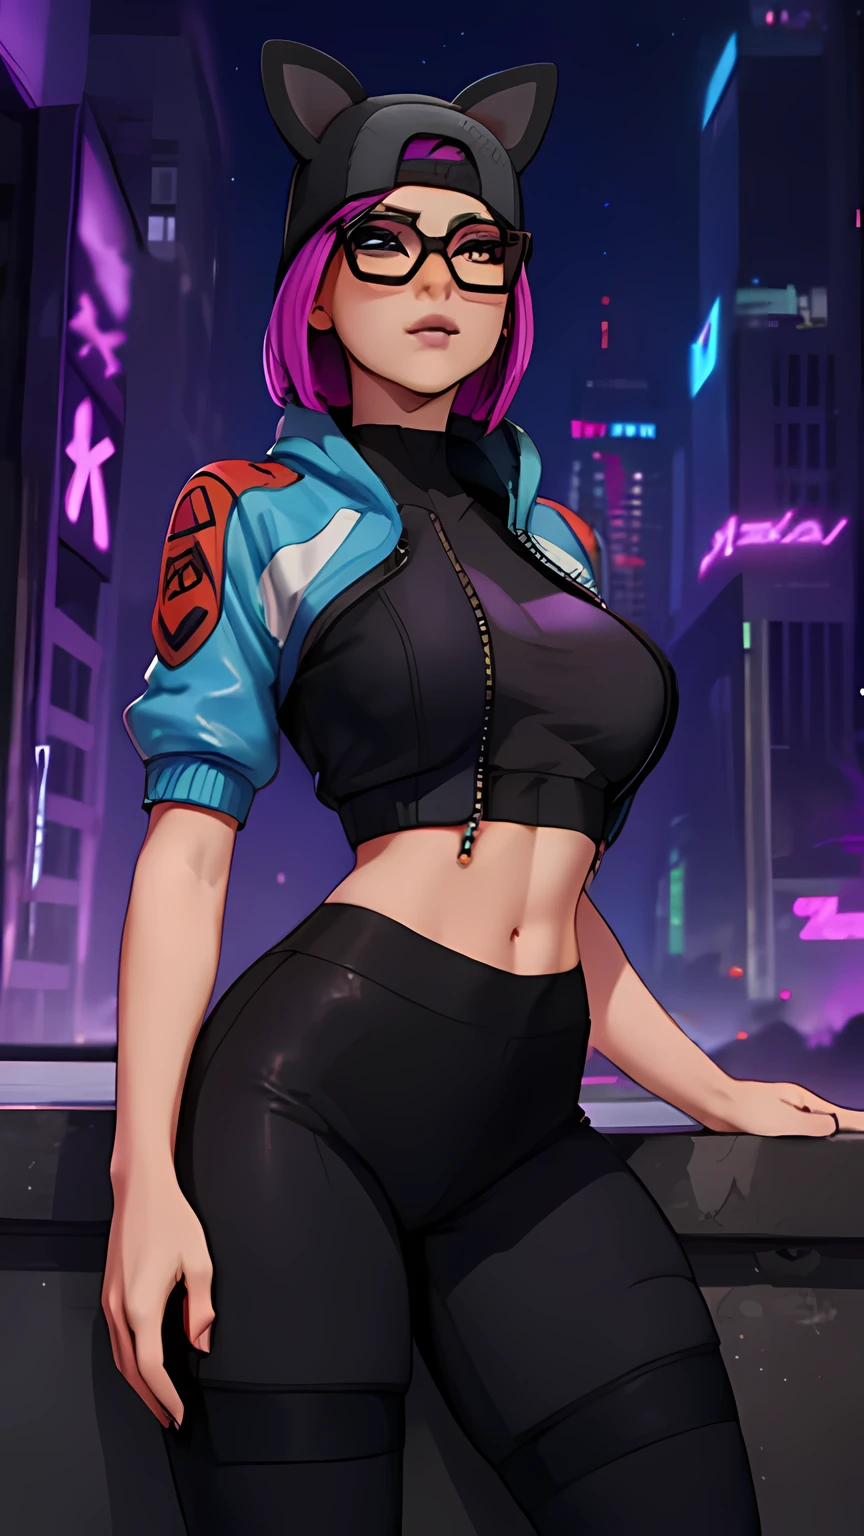 lince Cyberpunk , cap , black shorts with navy blue leggings, navy blue jacket ,extremely detailed, Detailed face, glasses ,beautiful face, fine eyes, looking at the viewer, feminine pose, evening 